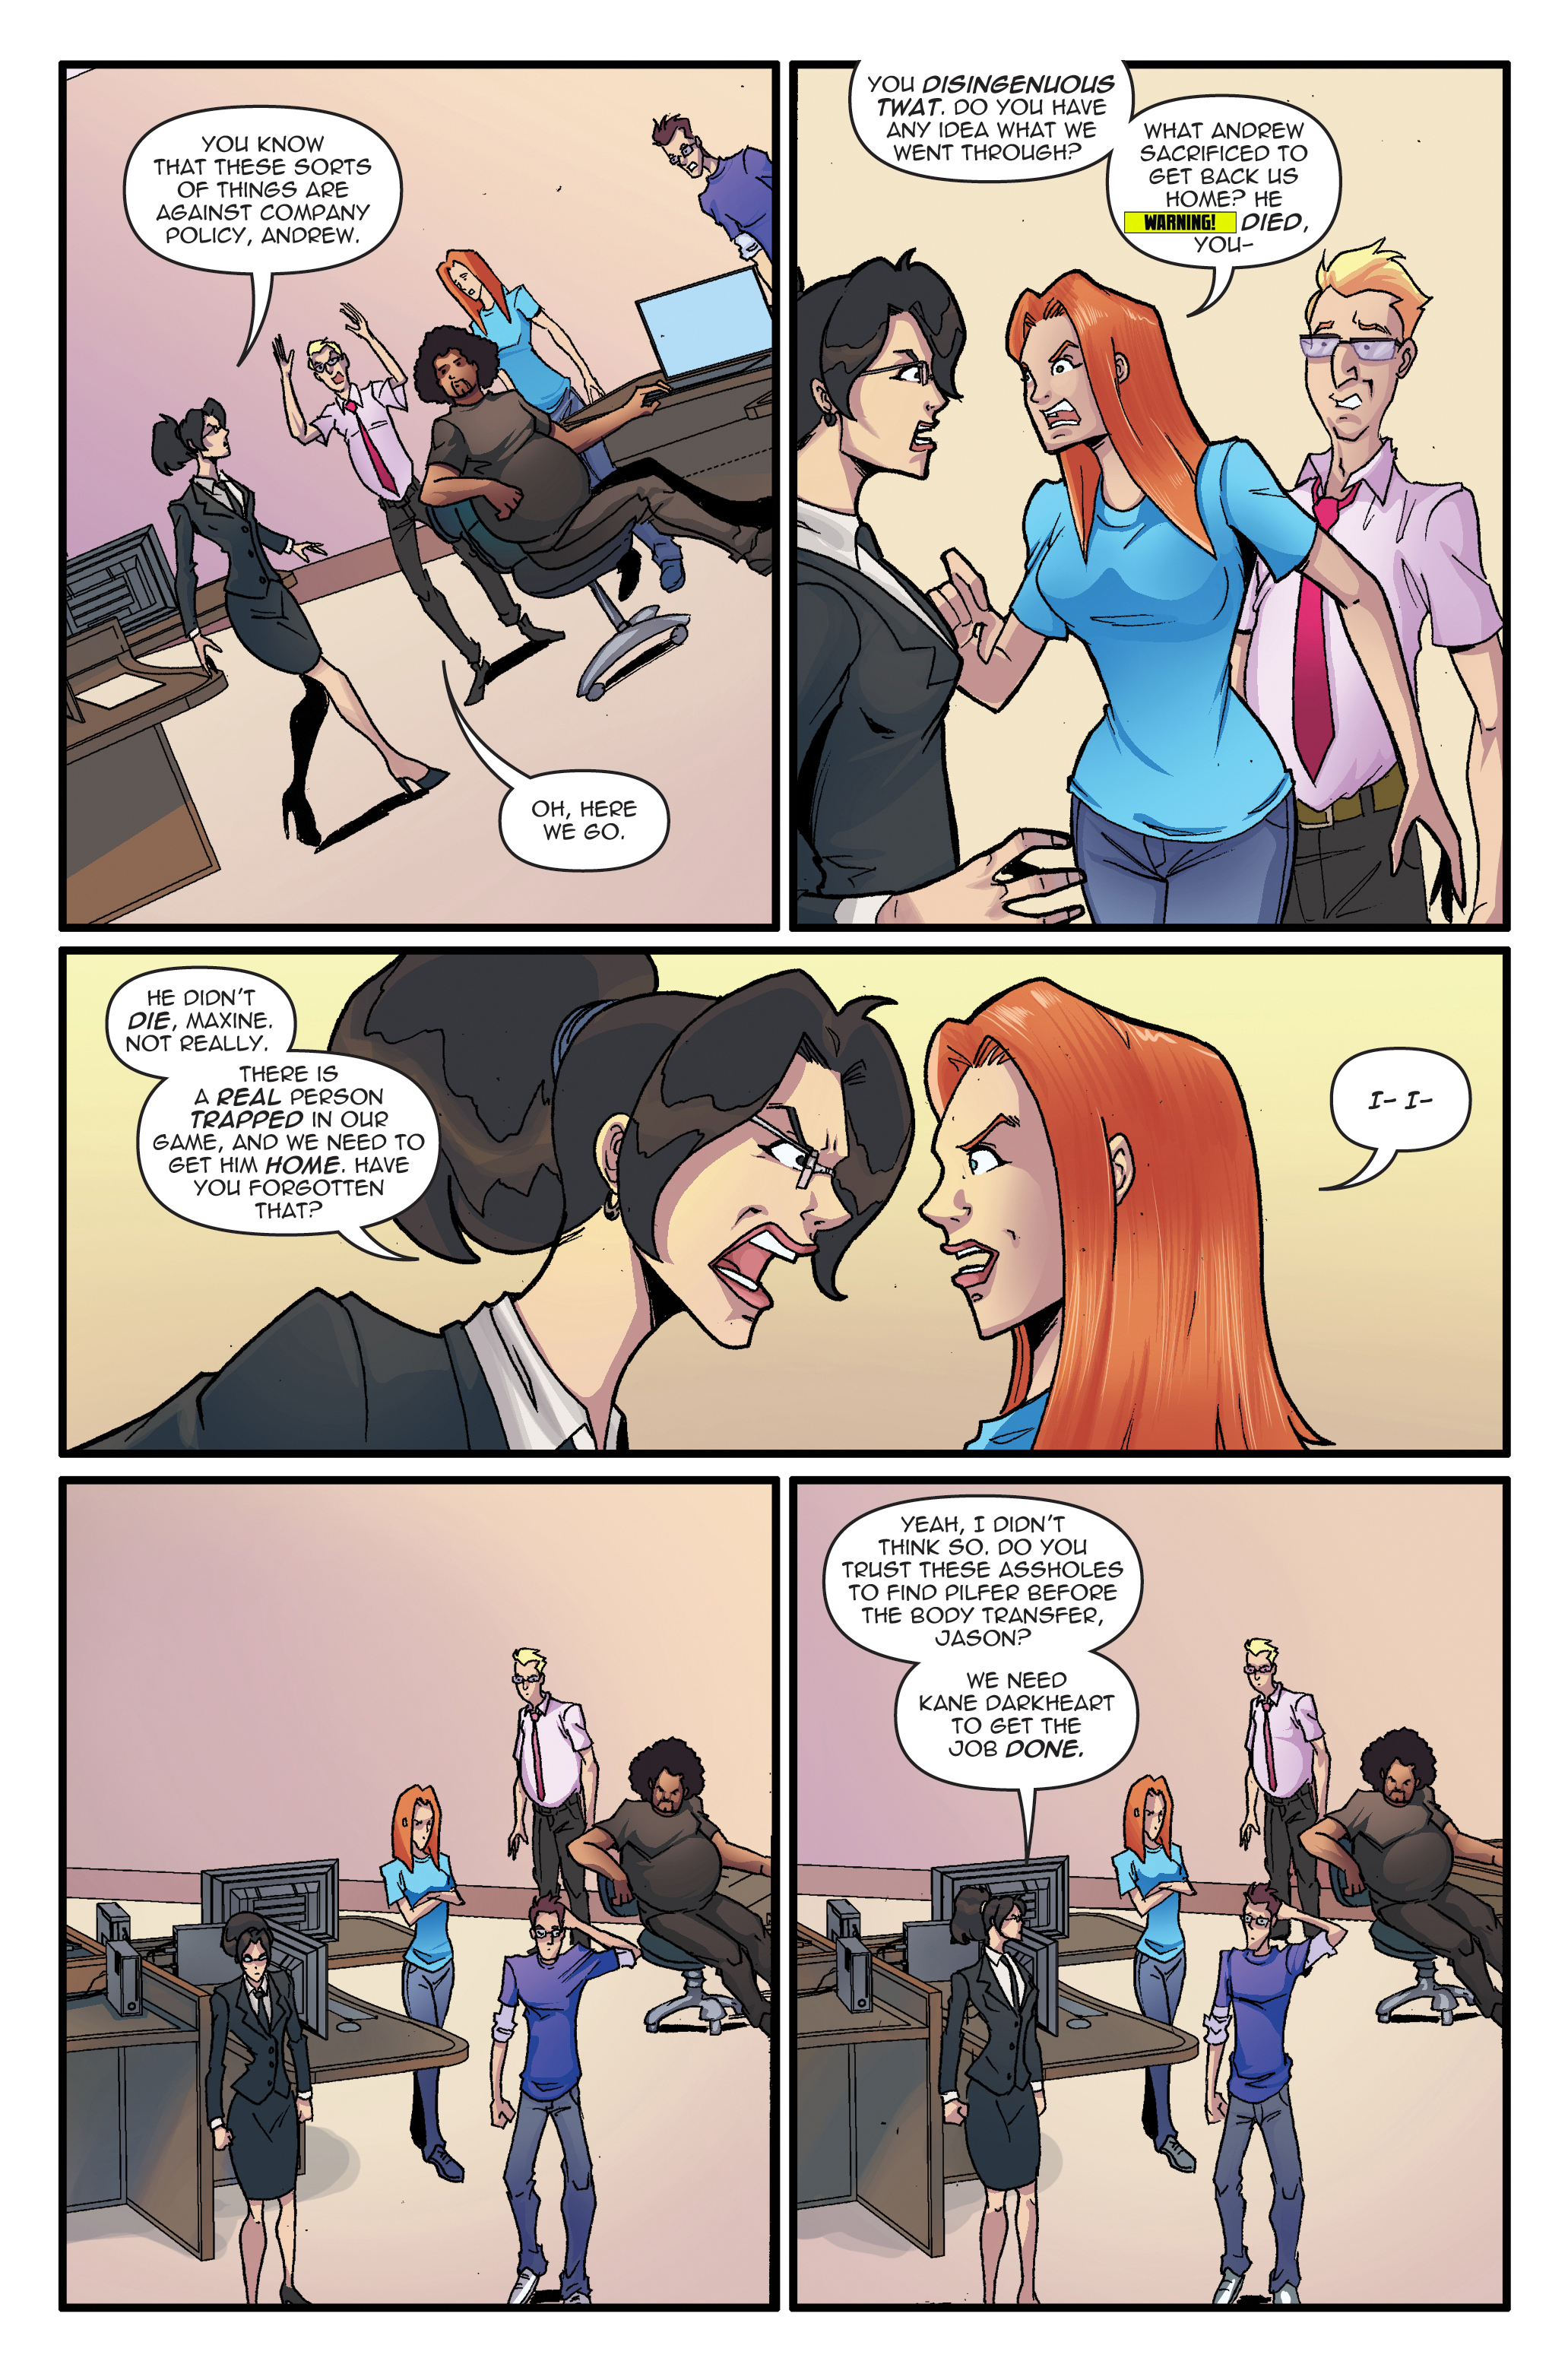 Double Jumpers Full Circle Jerks #1 Page 4.jpg